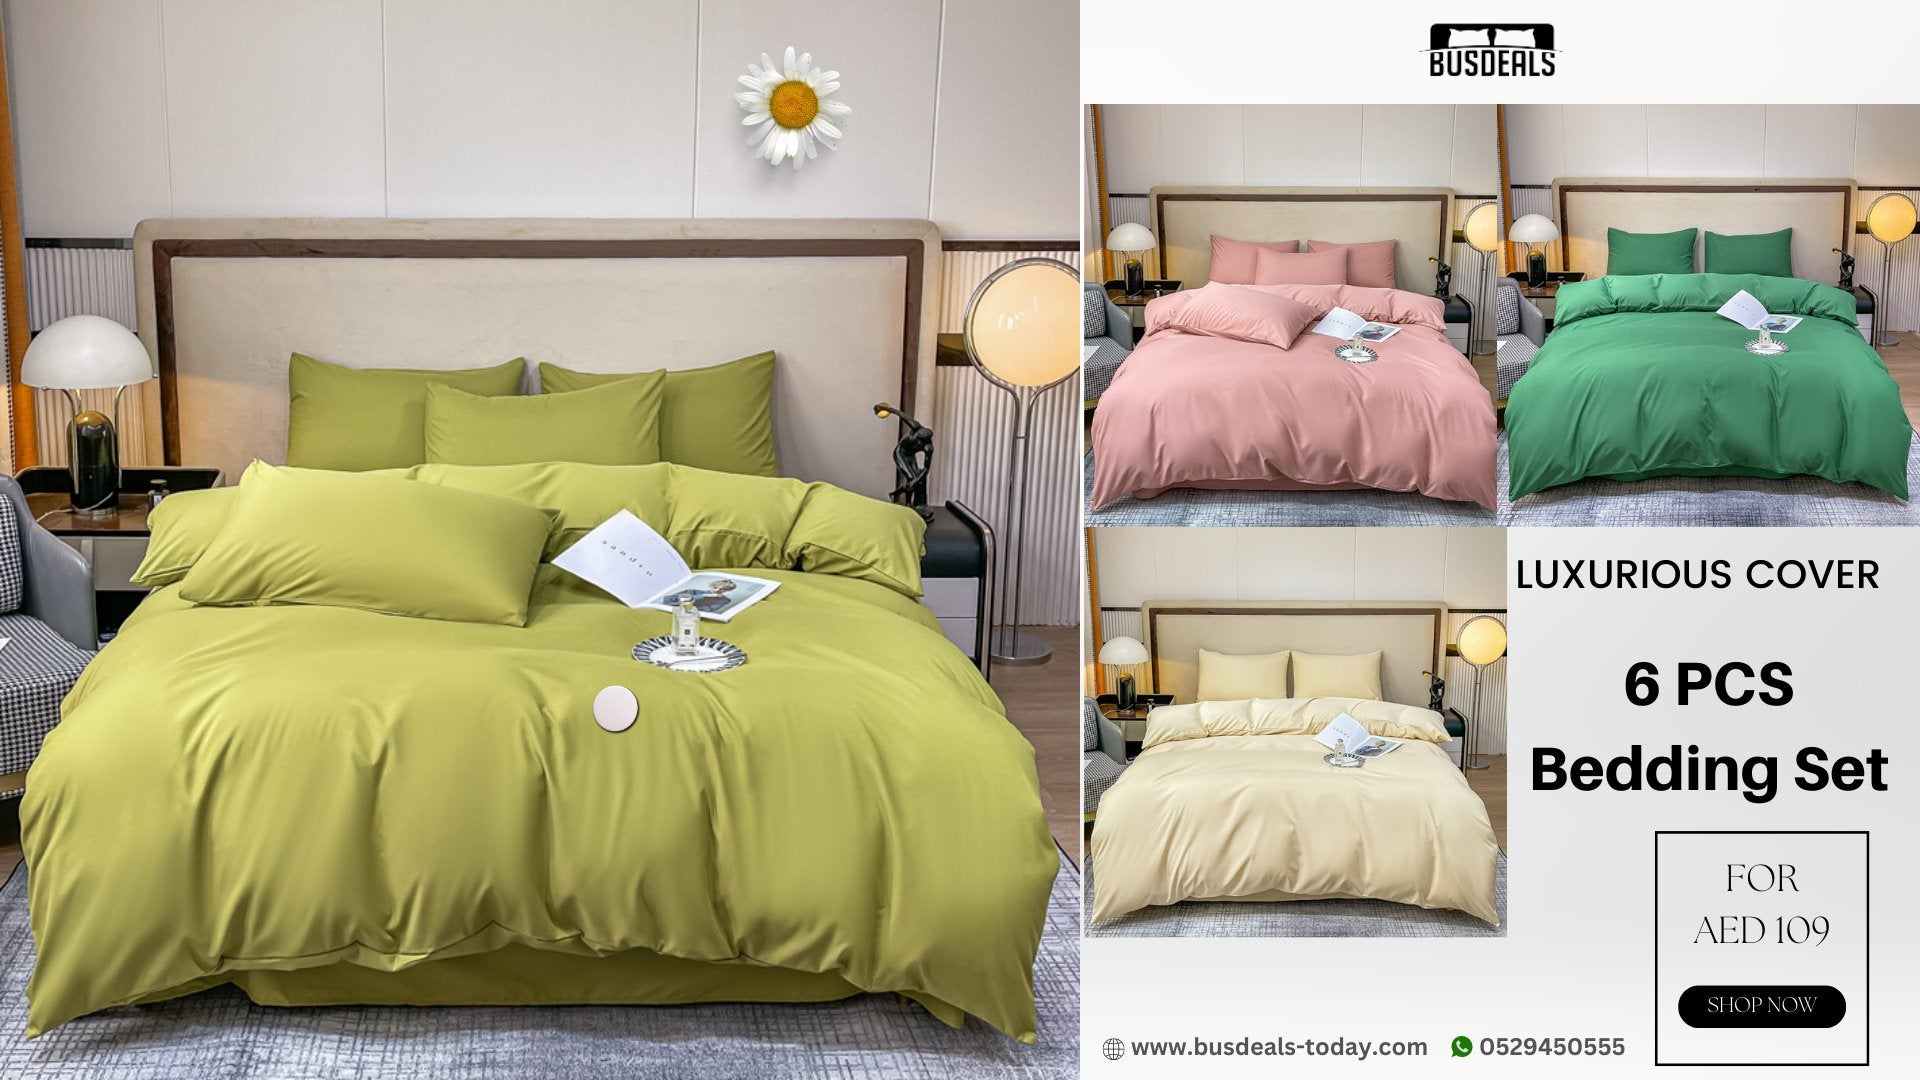 Experience Ultimate Comfort with Luxury Bedding from Busdeals Today - BusDeals